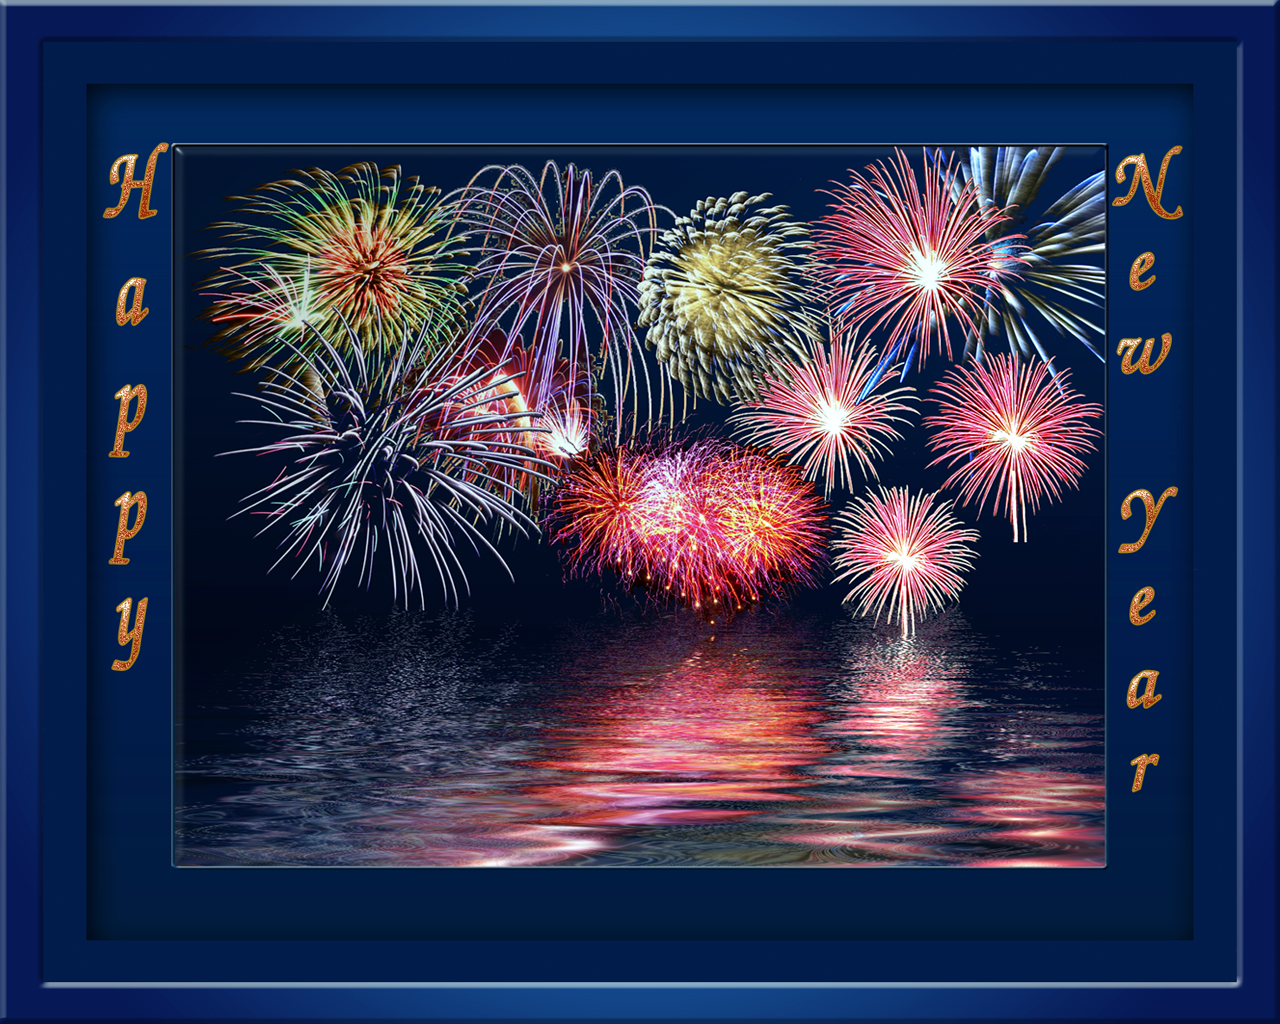 new year's wallpaper,fireworks,event,holiday,sky,new years day